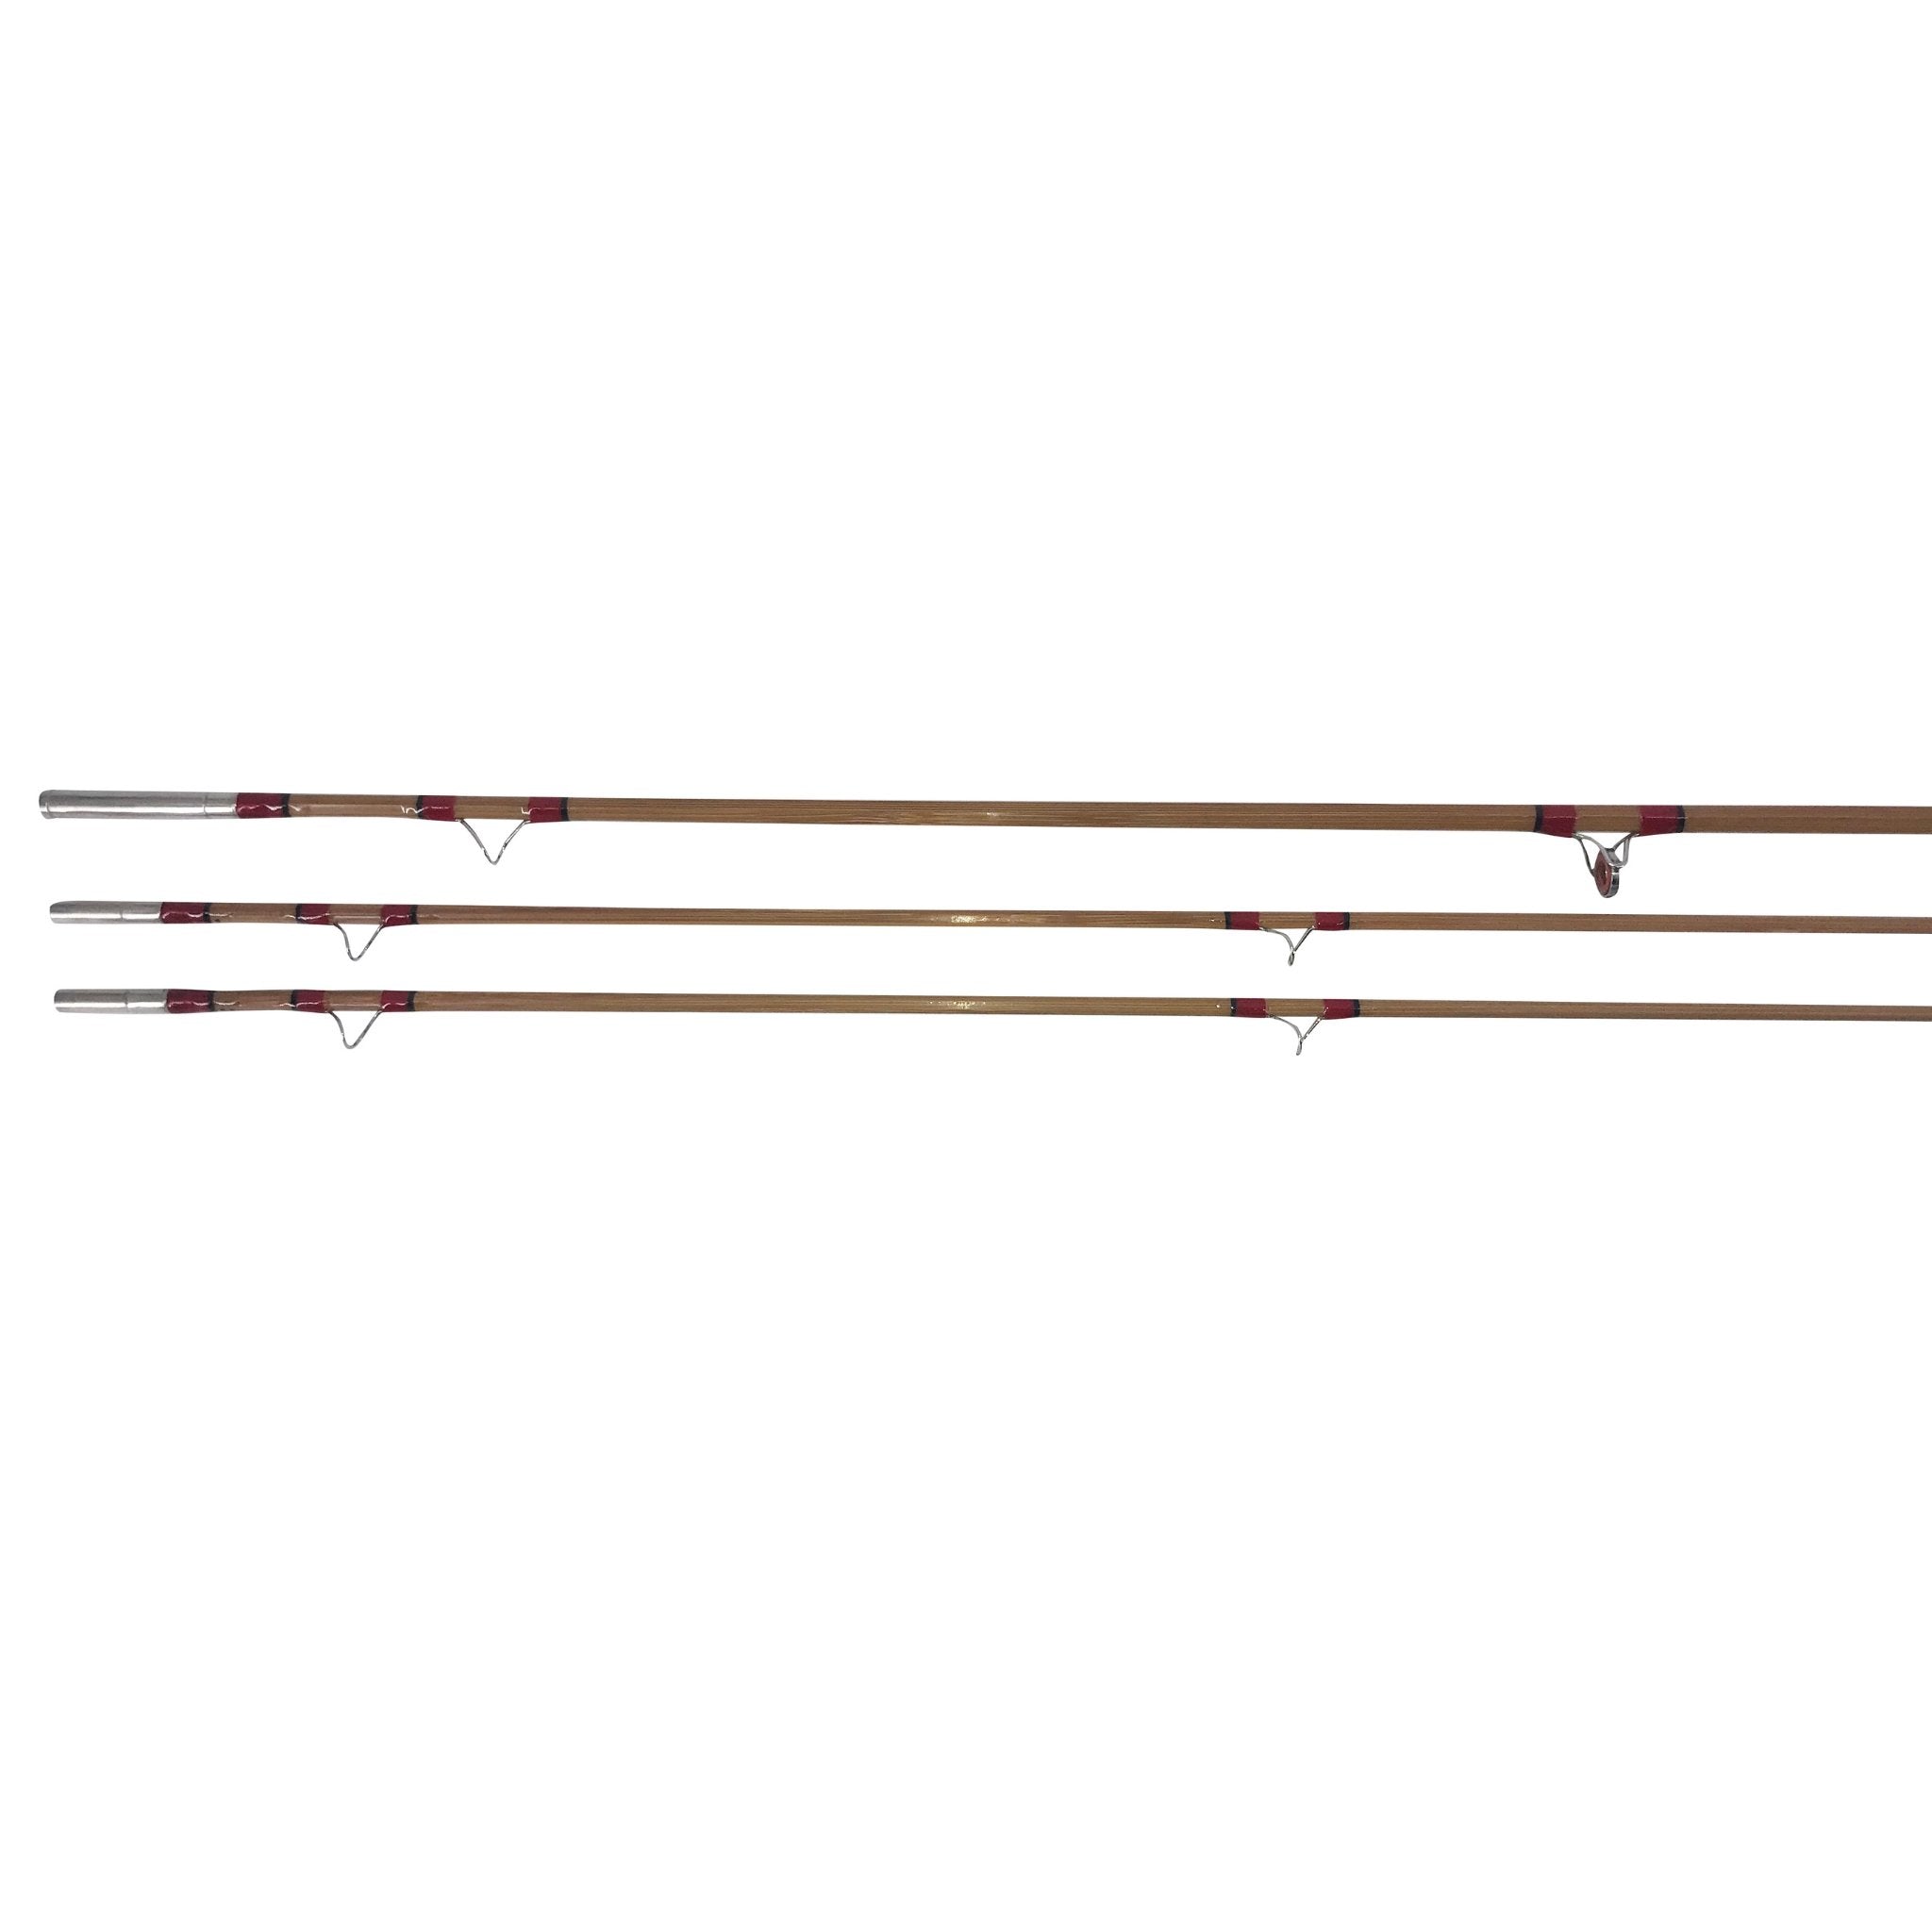 The Rogue 7' 6 5-wt Medium Fast Action Bamboo Fly Rod